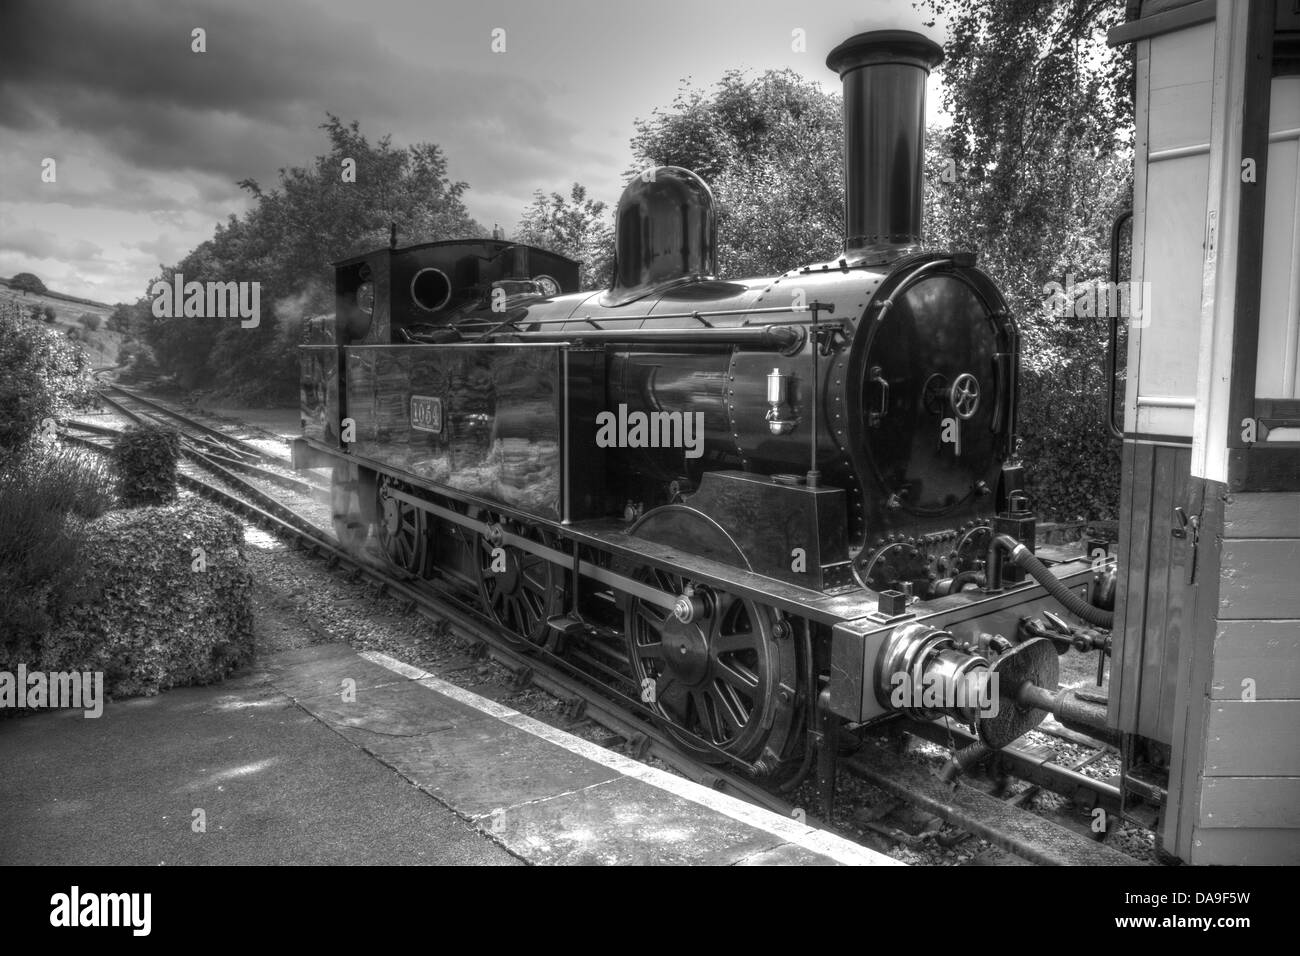 No.1054 the ‘Coal Tank’, one of the country's oldest working locos at Oakworth on the Keighley & Worth Valley Railway Stock Photo